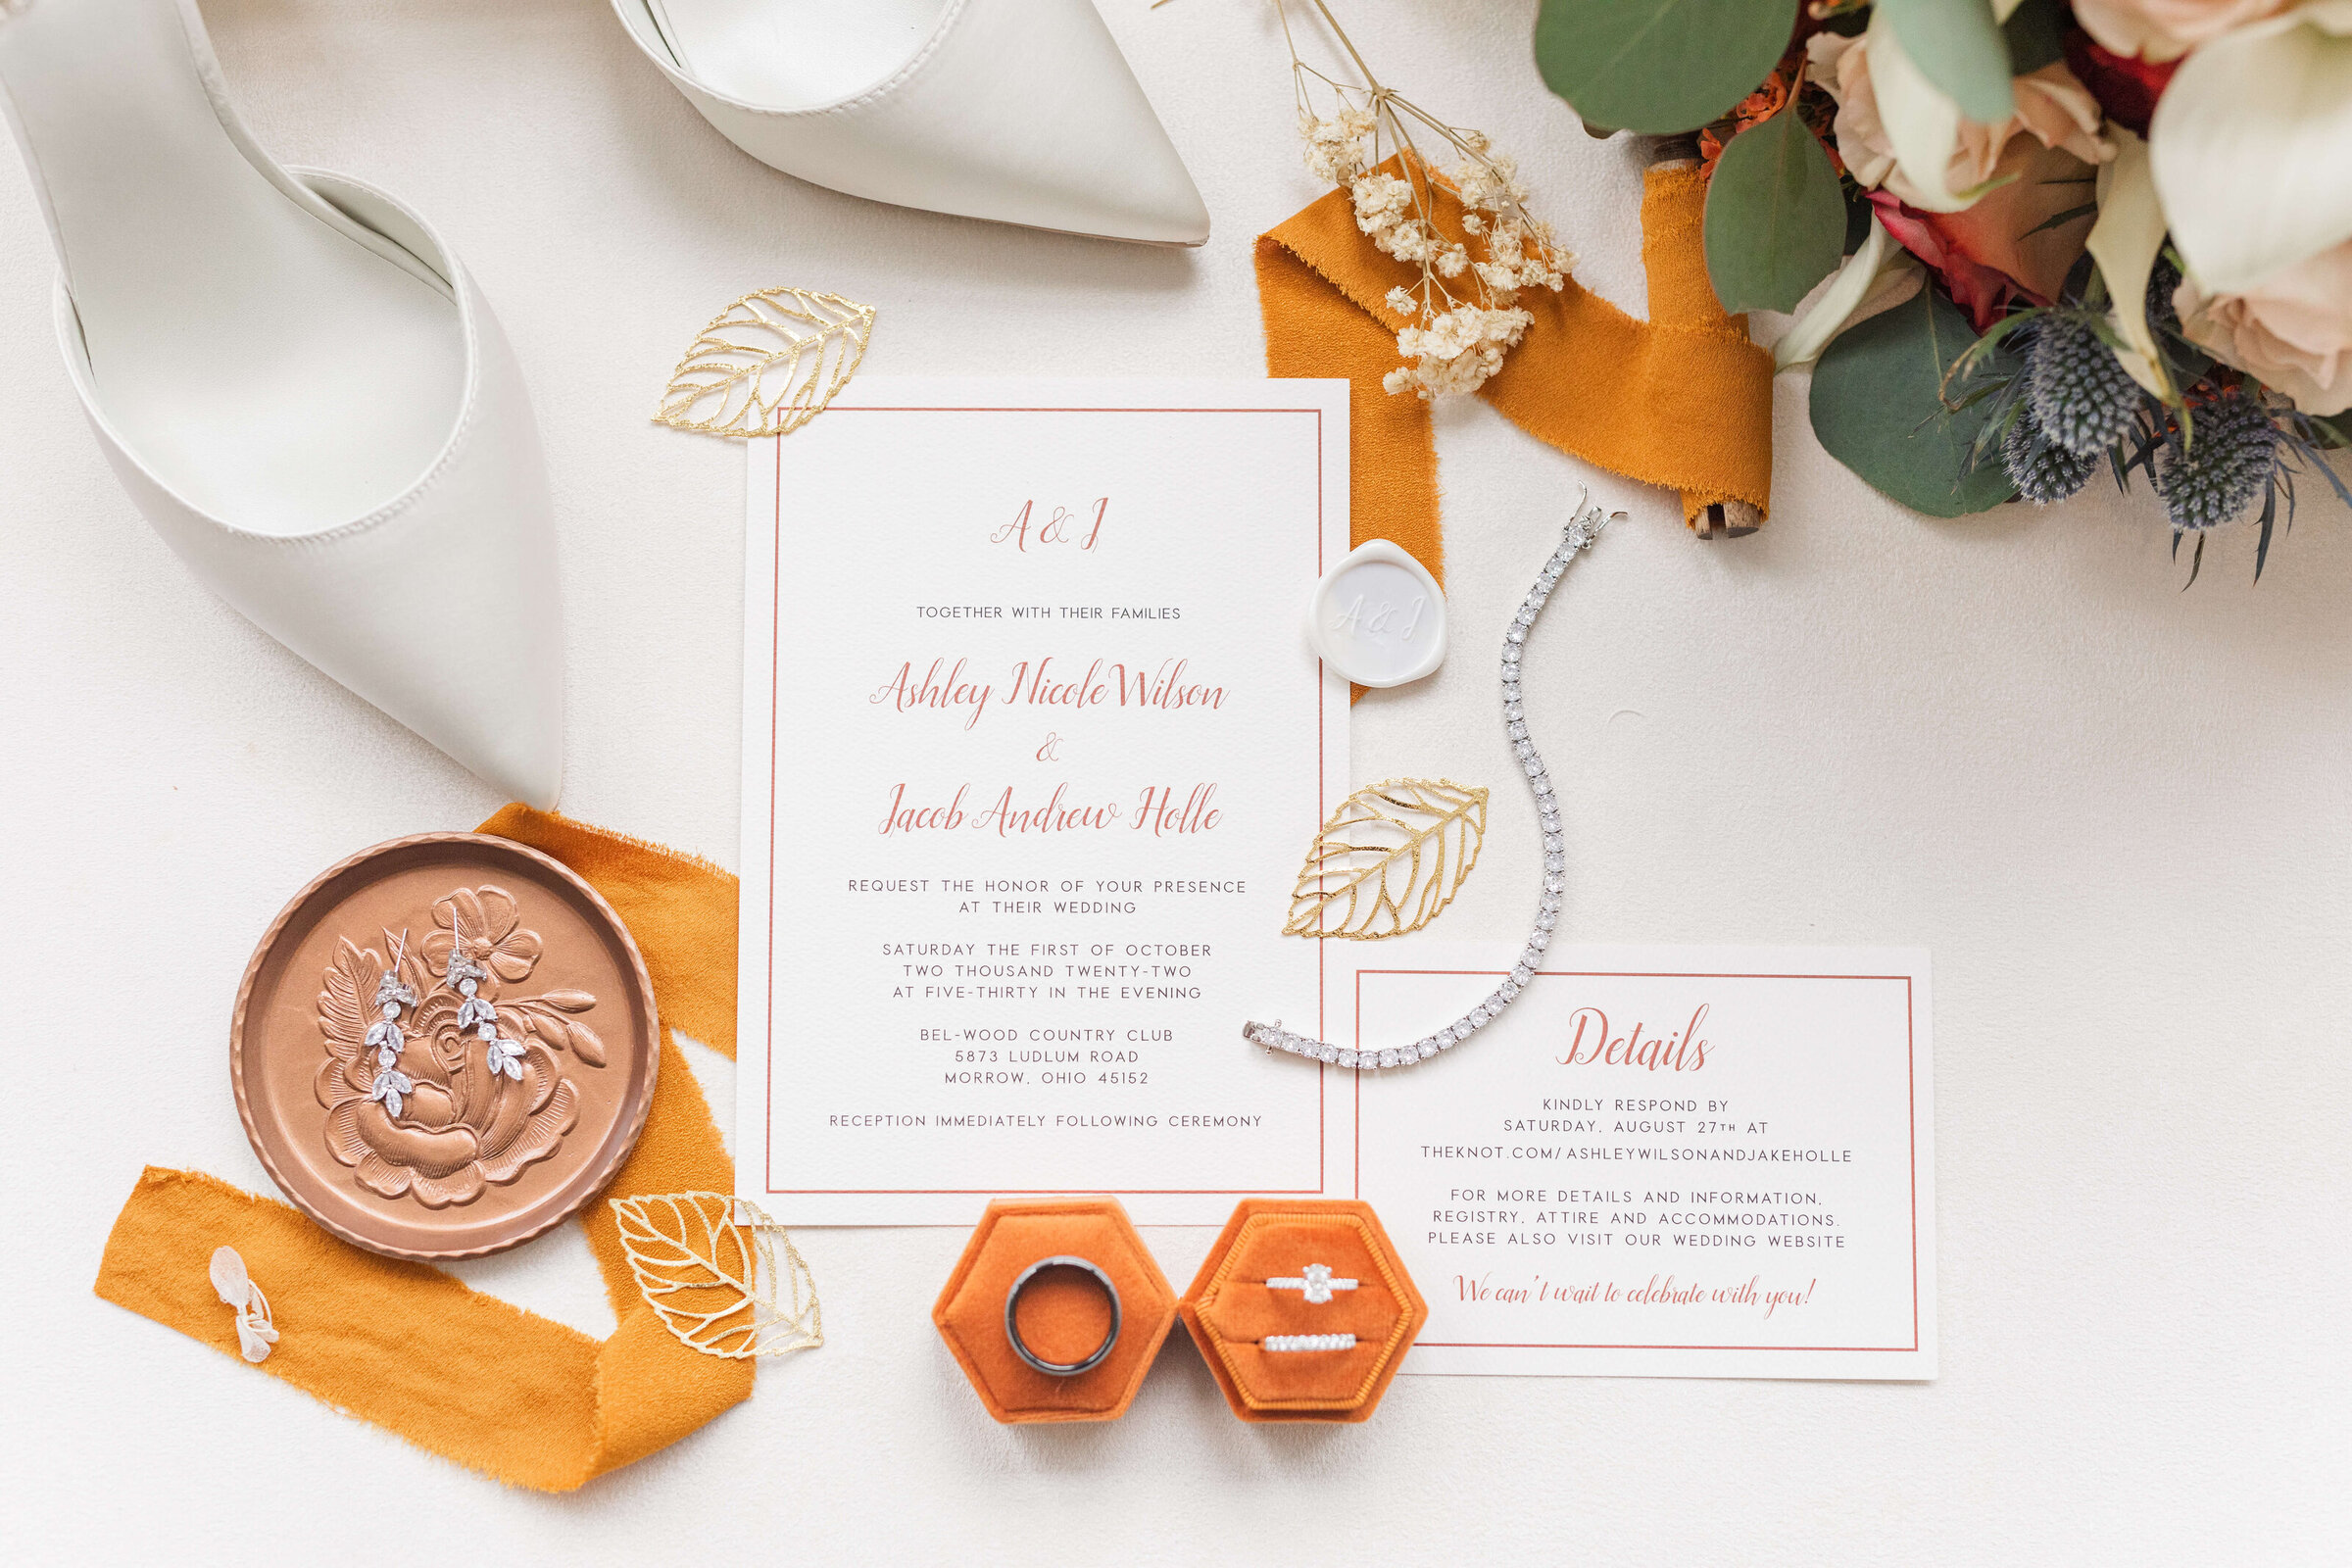 A wedding detail flat lay with an invitation suite, orange ring box with wedding rings, a small brown dish with earrings on it, white wedding shoes, orange ribbon and some flowers